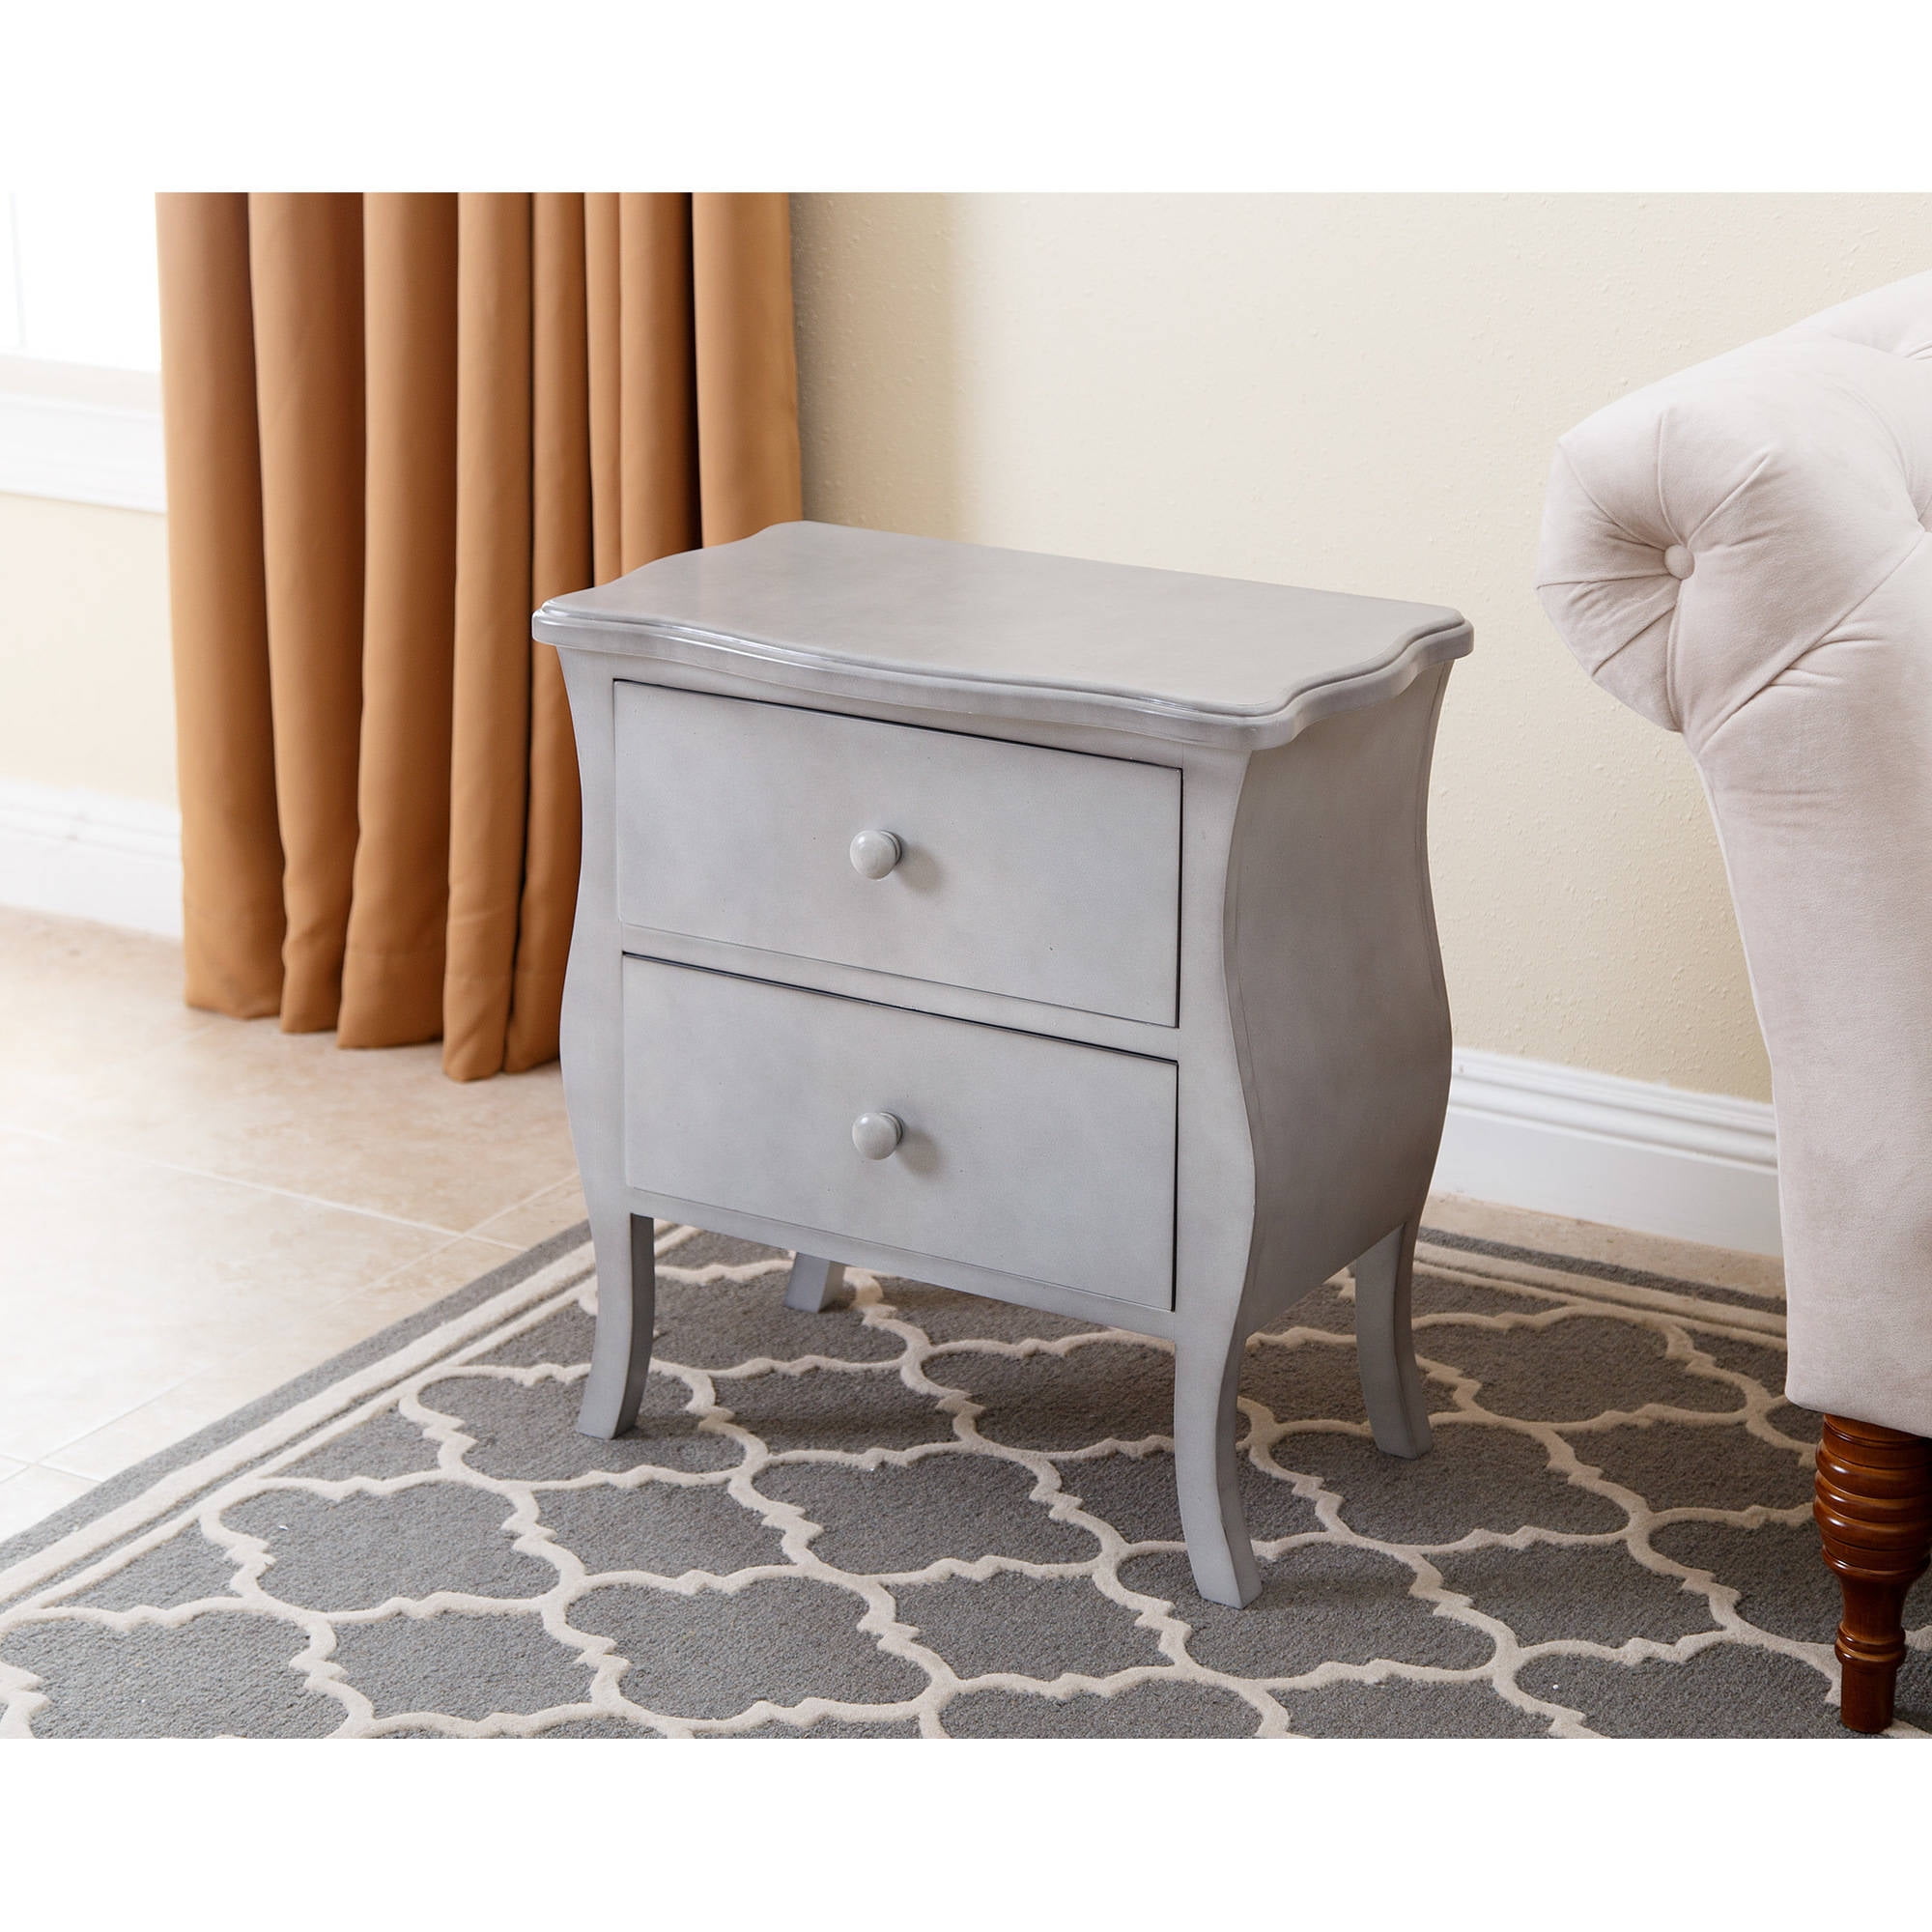 2-Drawer Antique Style Nightstand Bedroom Furniture Gray Night Accent Table 